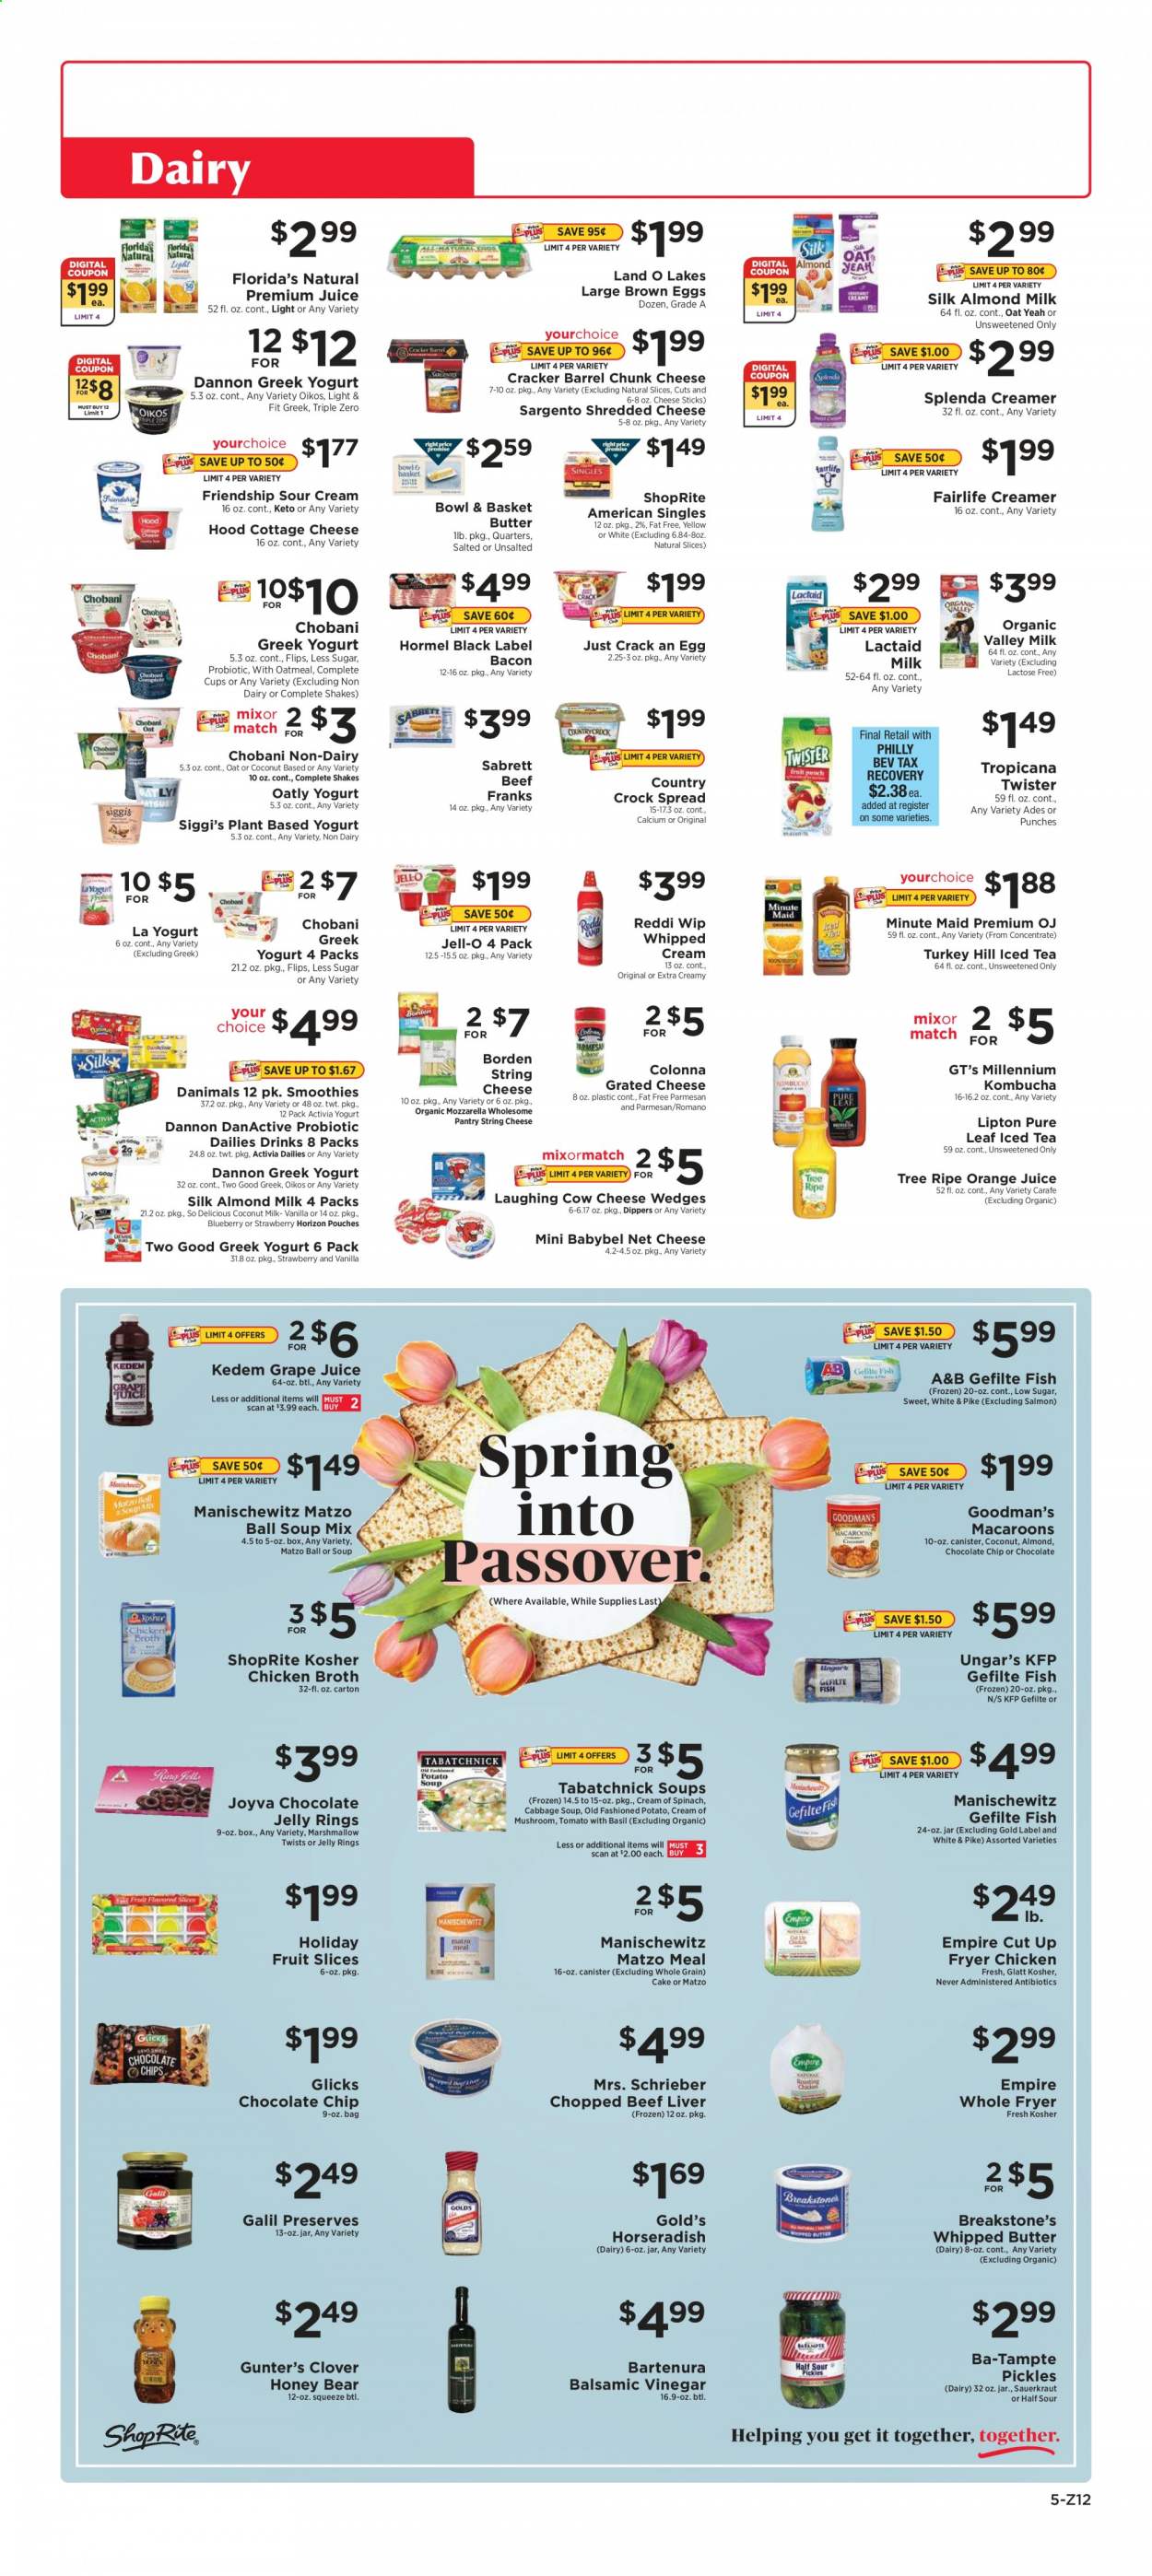 thumbnail - ShopRite Flyer - 02/28/2021 - 03/06/2021 - Sales products - mushrooms, cake, macaroons, salmon, northern pike, fish, soup mix, soup, Bowl & Basket, Hormel, bacon, cottage cheese, Lactaid, mozzarella, shredded cheese, string cheese, parmesan, The Laughing Cow, grated cheese, Babybel, chunk cheese, Sargento, greek yoghurt, yoghurt, jelly, Clover, Activia, Oikos, Chobani, Dannon, Danimals, almond milk, shake, whipped butter, sour cream, whipped cream, creamer, spinach, pickles, marshmallows, crackers, fruit slices, Florida's Natural, cheese sticks, matzo meal, chicken broth, oatmeal, Jell-O, broth, coconut milk, sauerkraut, esponja, horseradish, balsamic vinegar, vinegar, honey, orange juice, juice, Lipton, Tropicana Twister, smoothie, kombucha, Pure Leaf, beef liver, beef meat, bowl, calcium. Page 5.